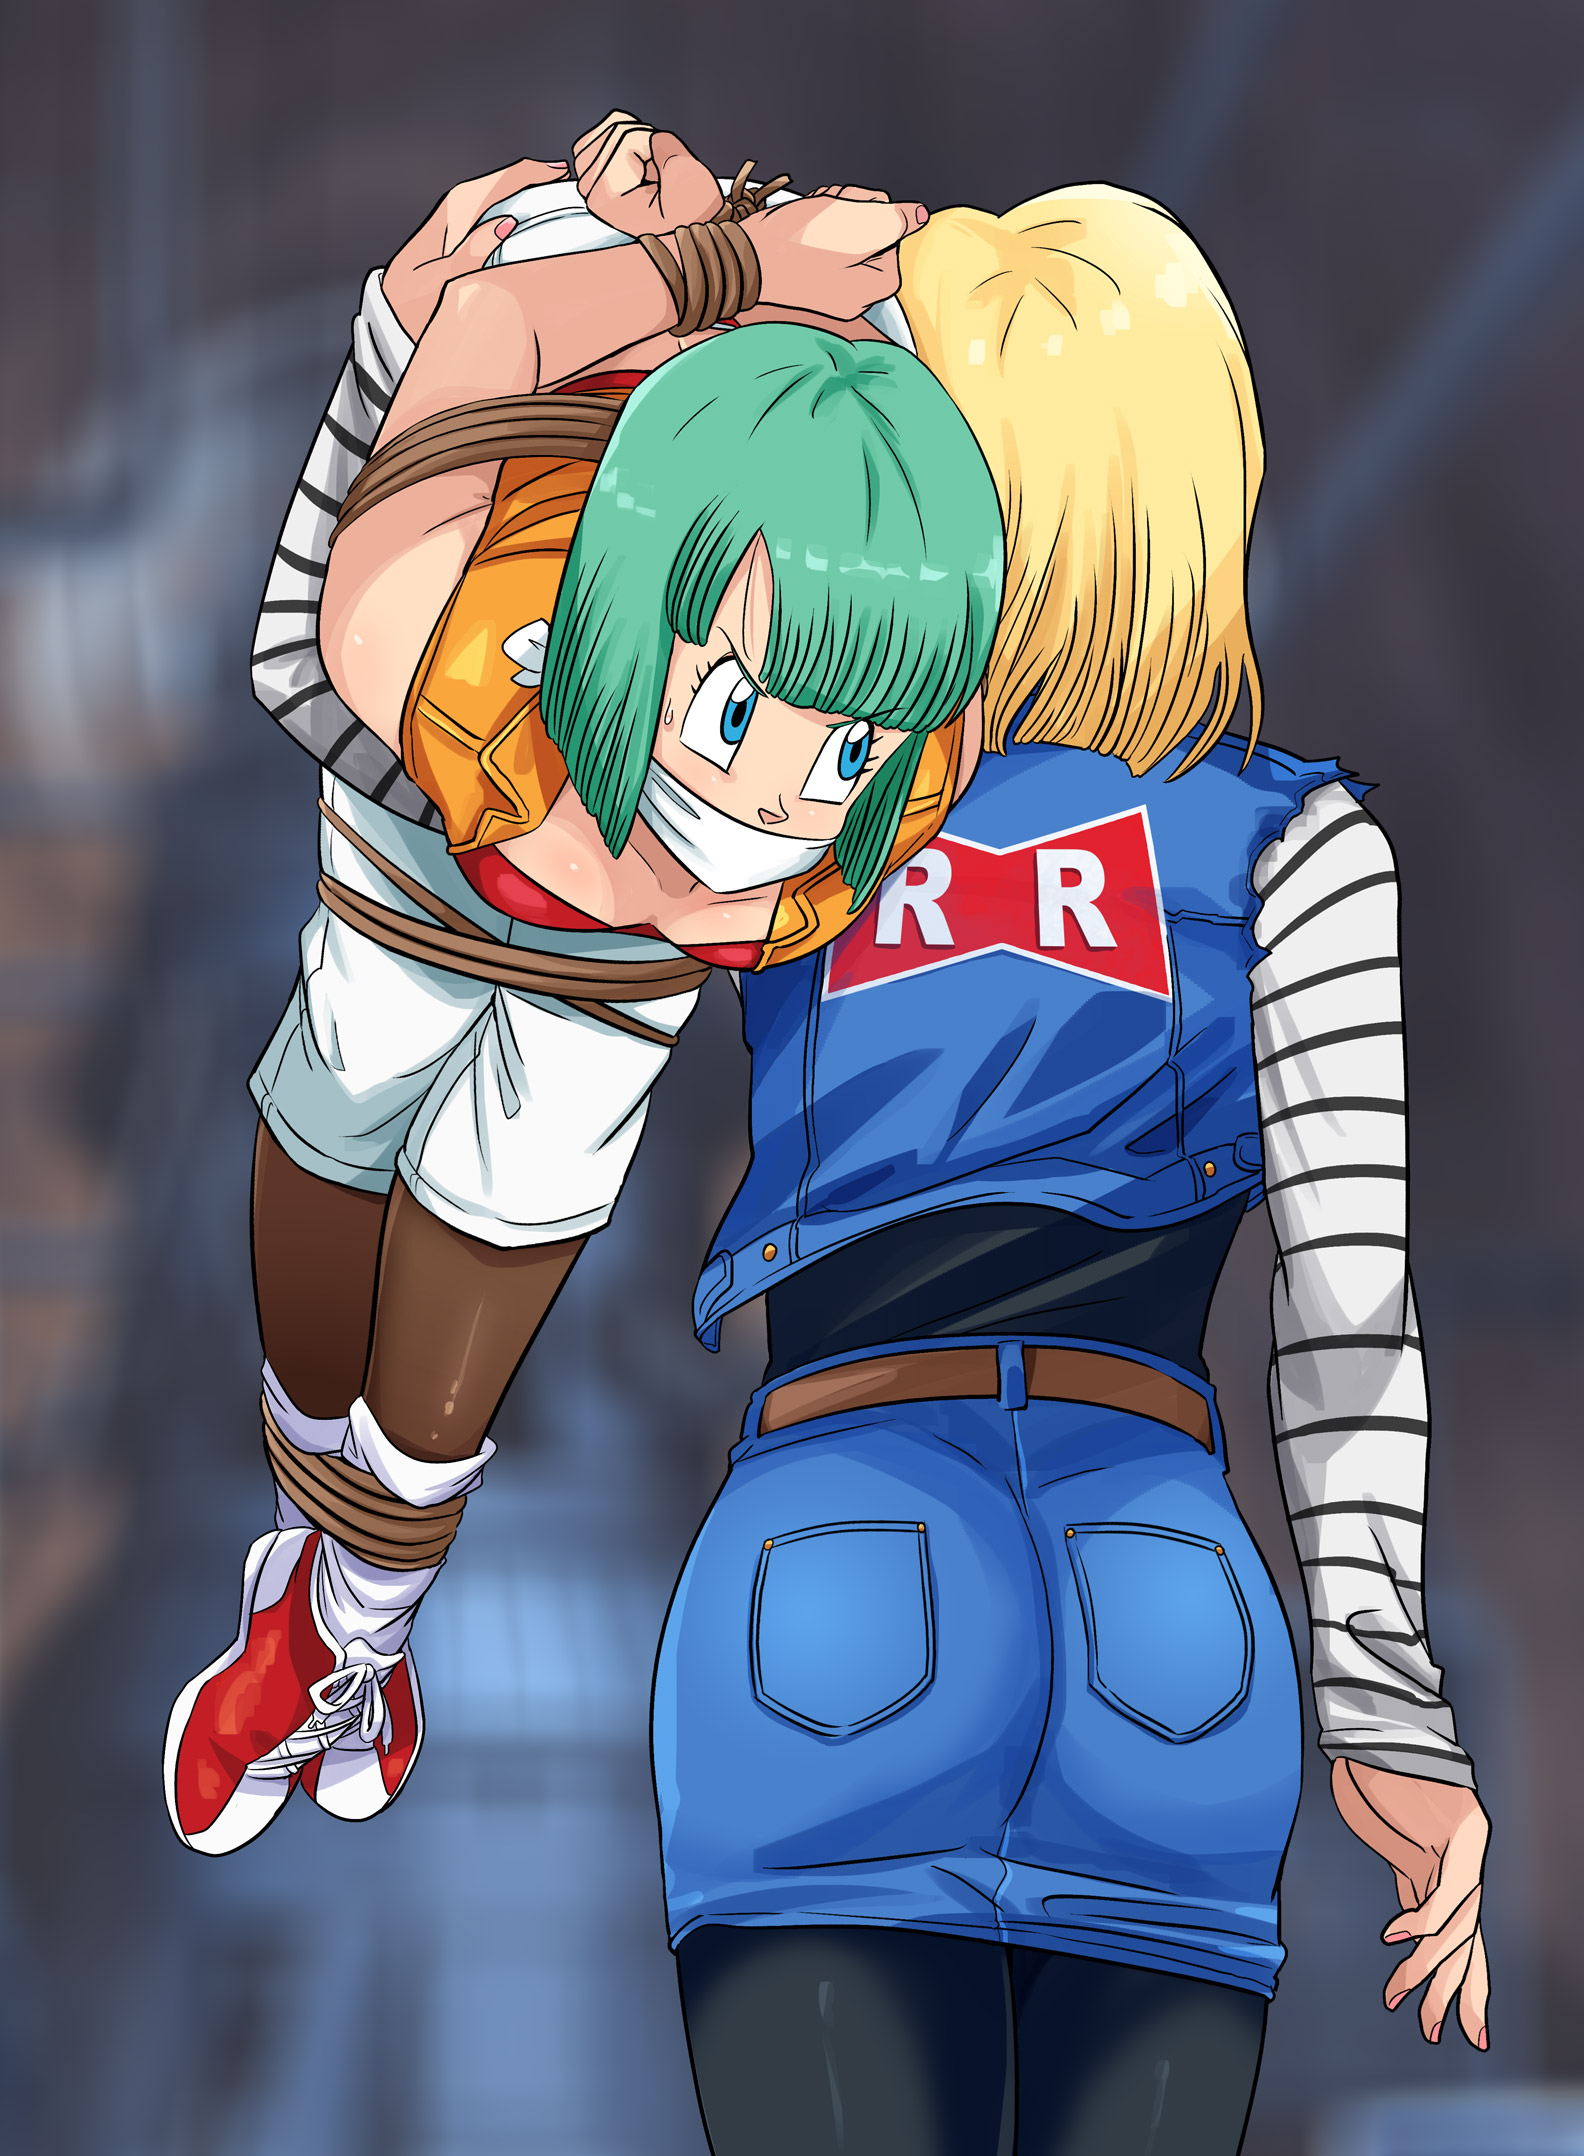 Android 18 tied up